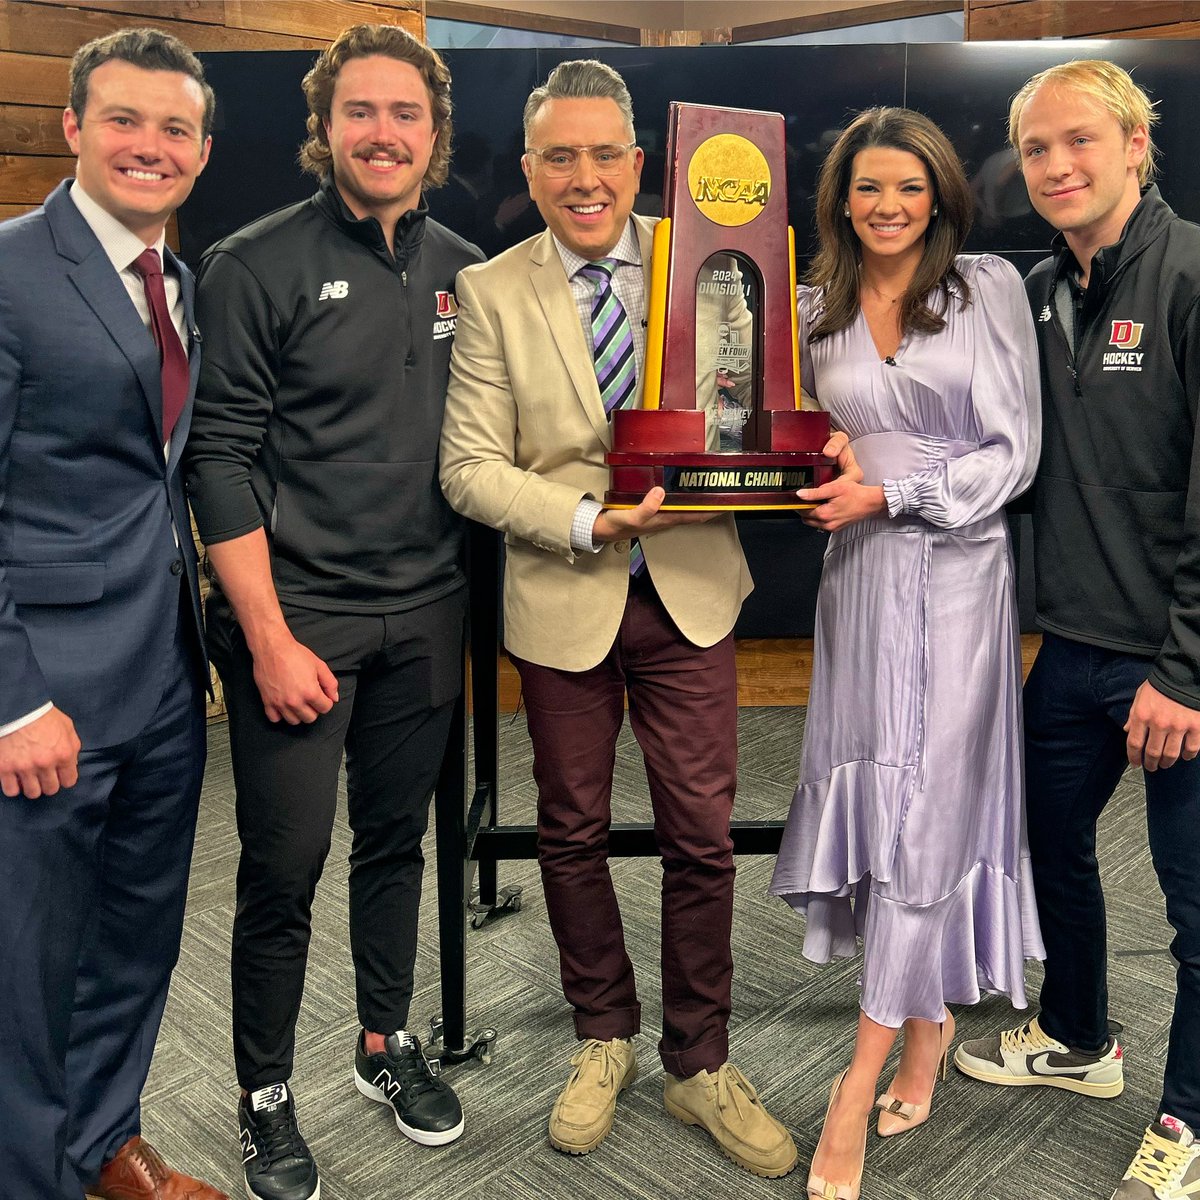 Here’s to @DU_Hockey @DU_Pioneers ! We’ll just hold on to the trophy for ya … til you win the next one 😂😂 @channel2kwgn @katieorth @gregperezwx ——>